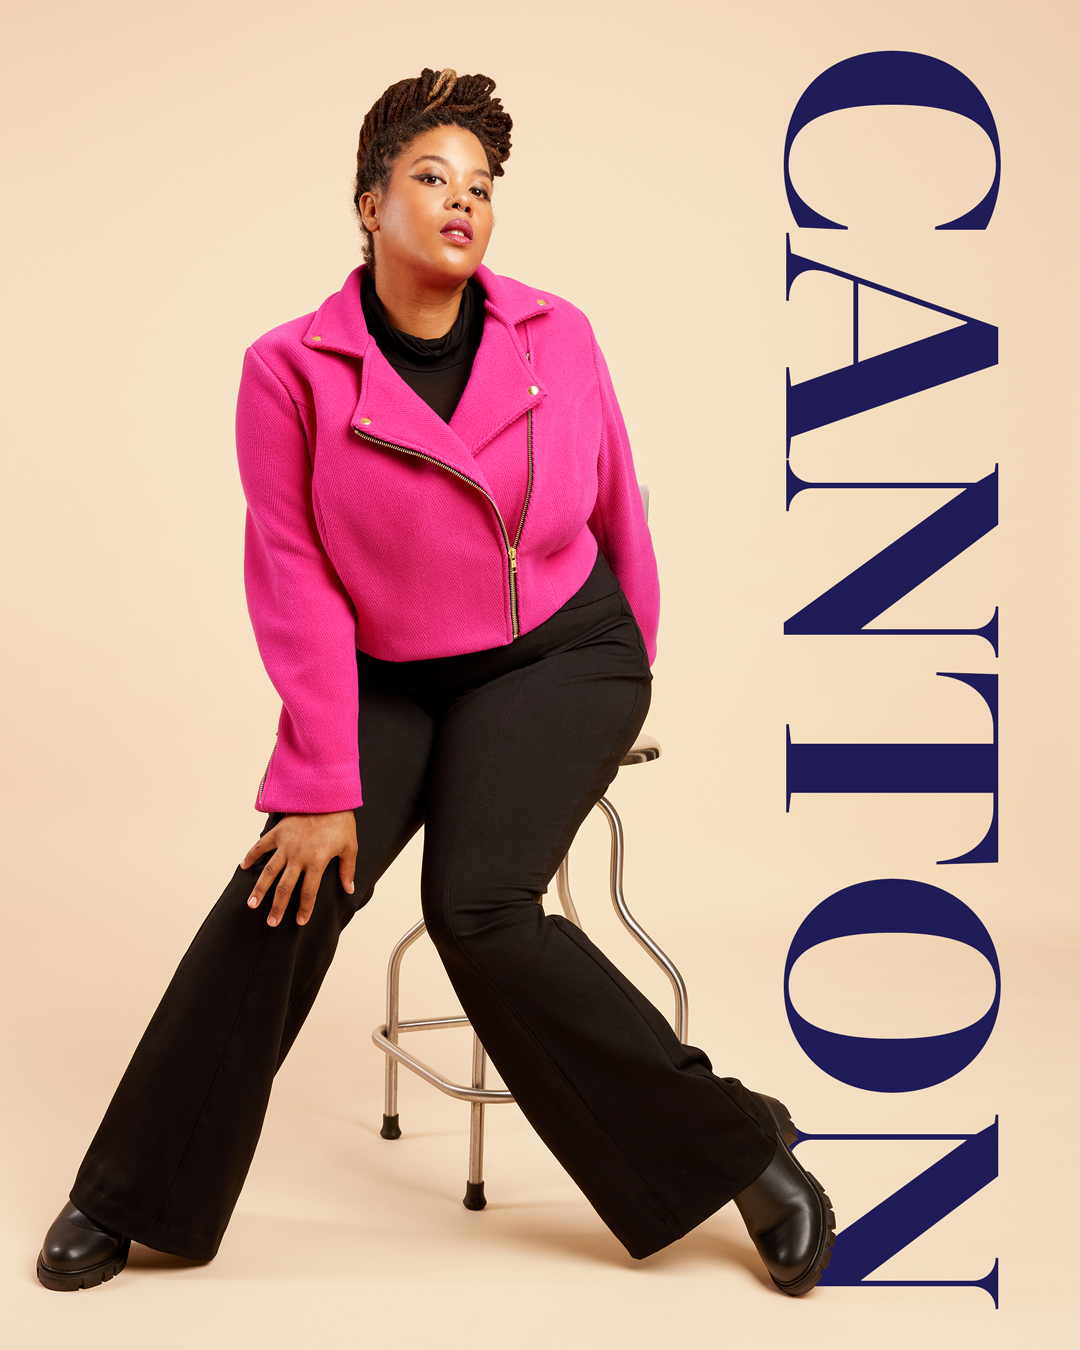 Introducing the Canton Moto Jacket sewing pattern for curves